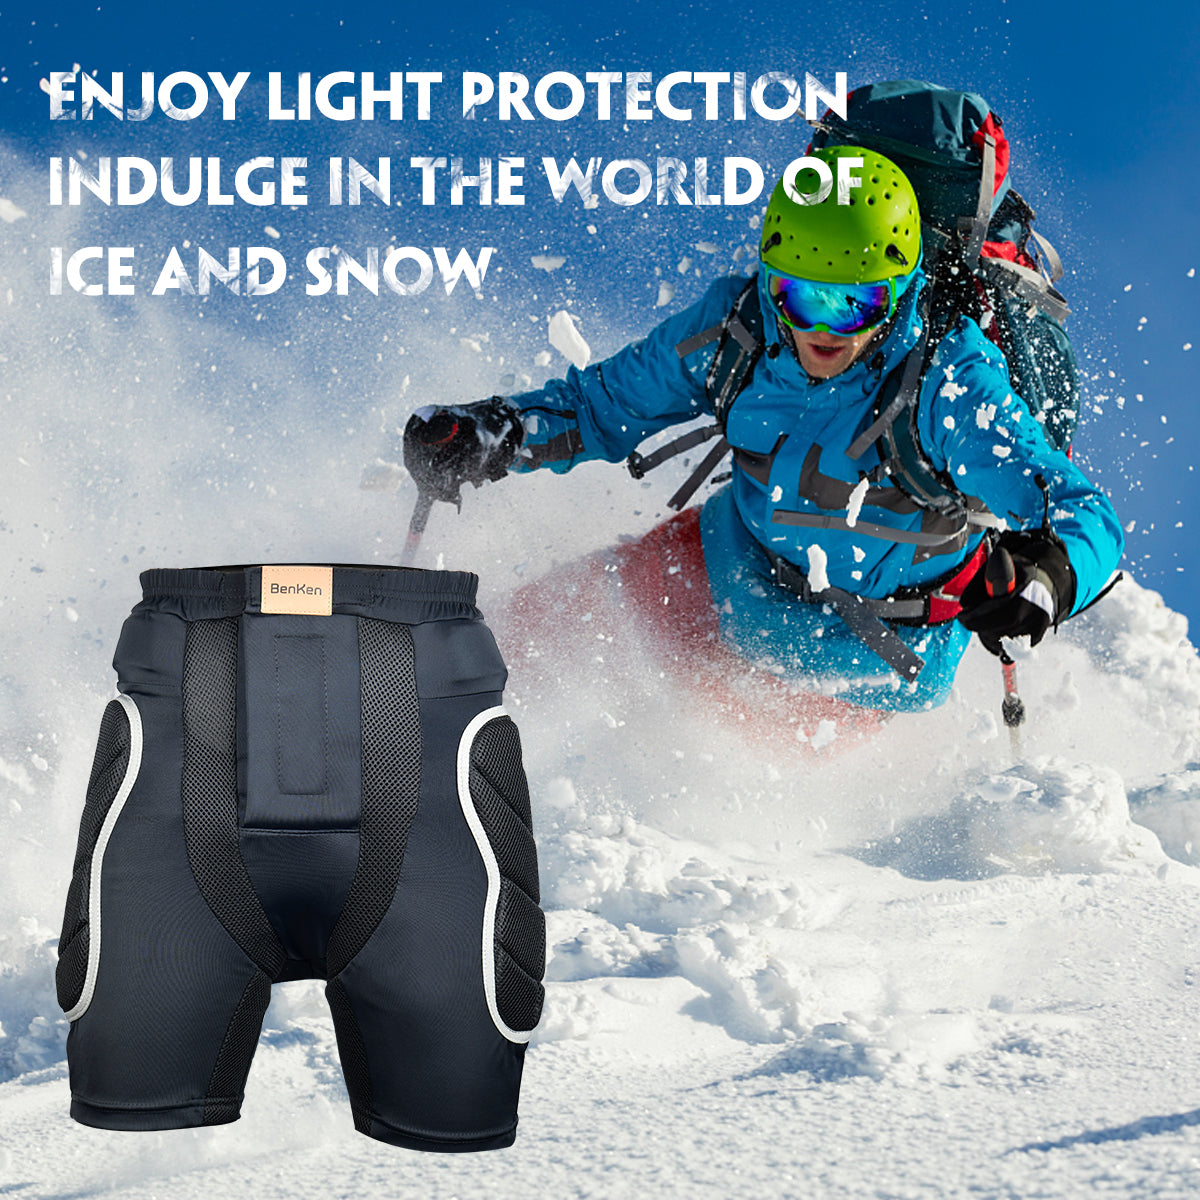 Do it yourself tailbone and butt protection for skiing and snowboarding